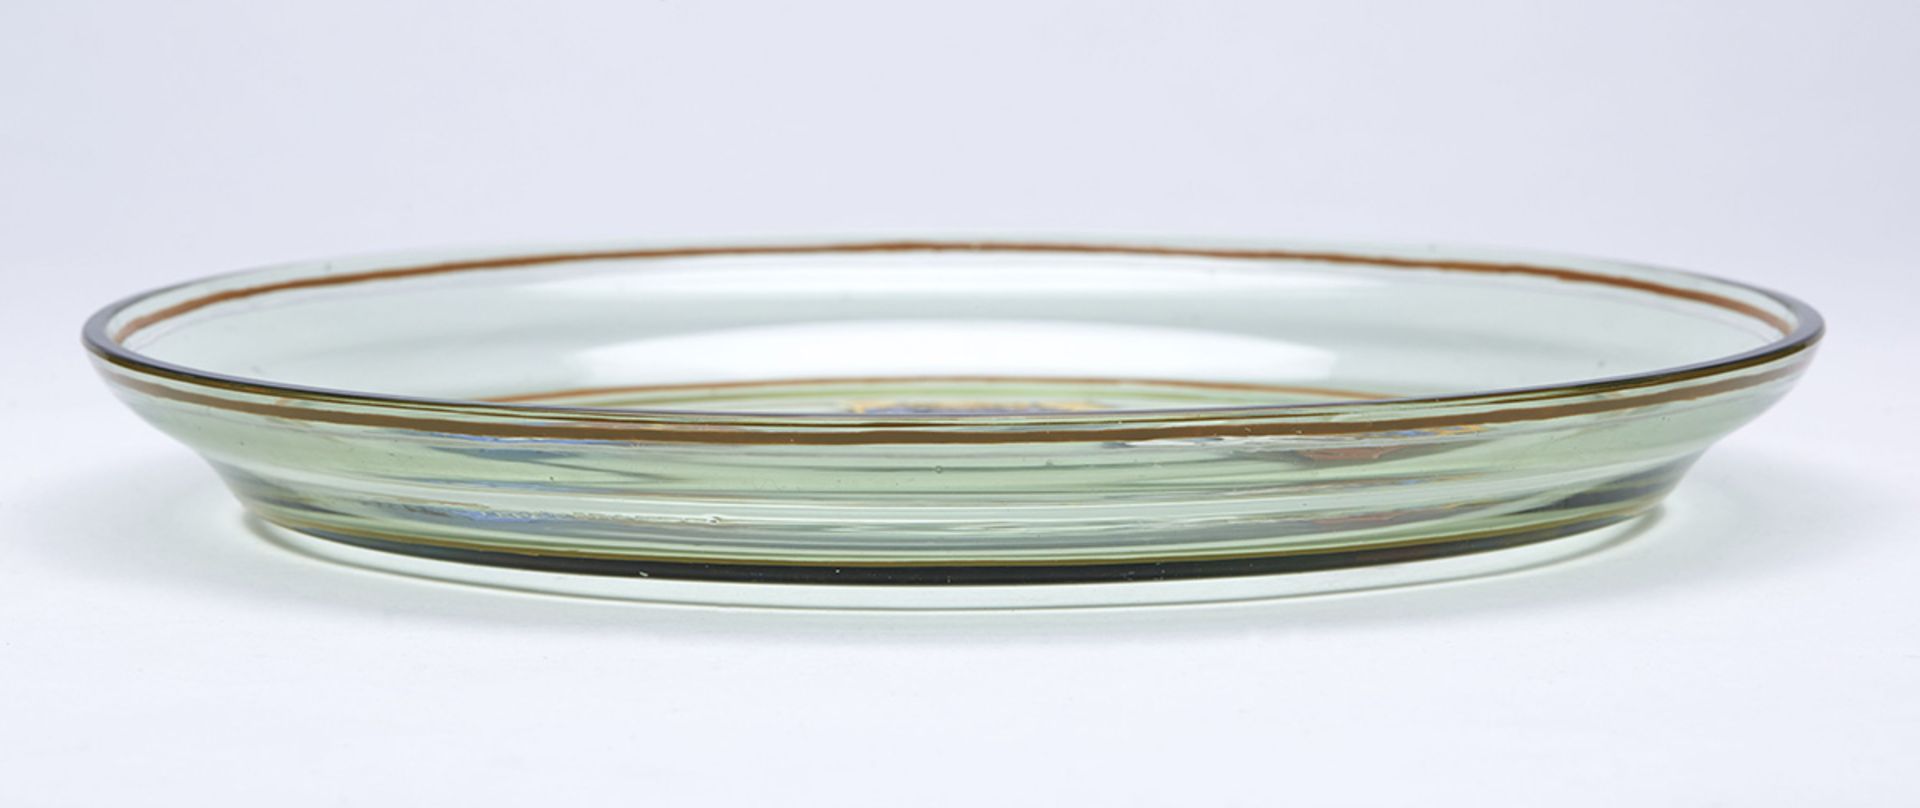 Bohemian Egermann Crested Glass Tray & Glasses 19Th C. - Image 9 of 9